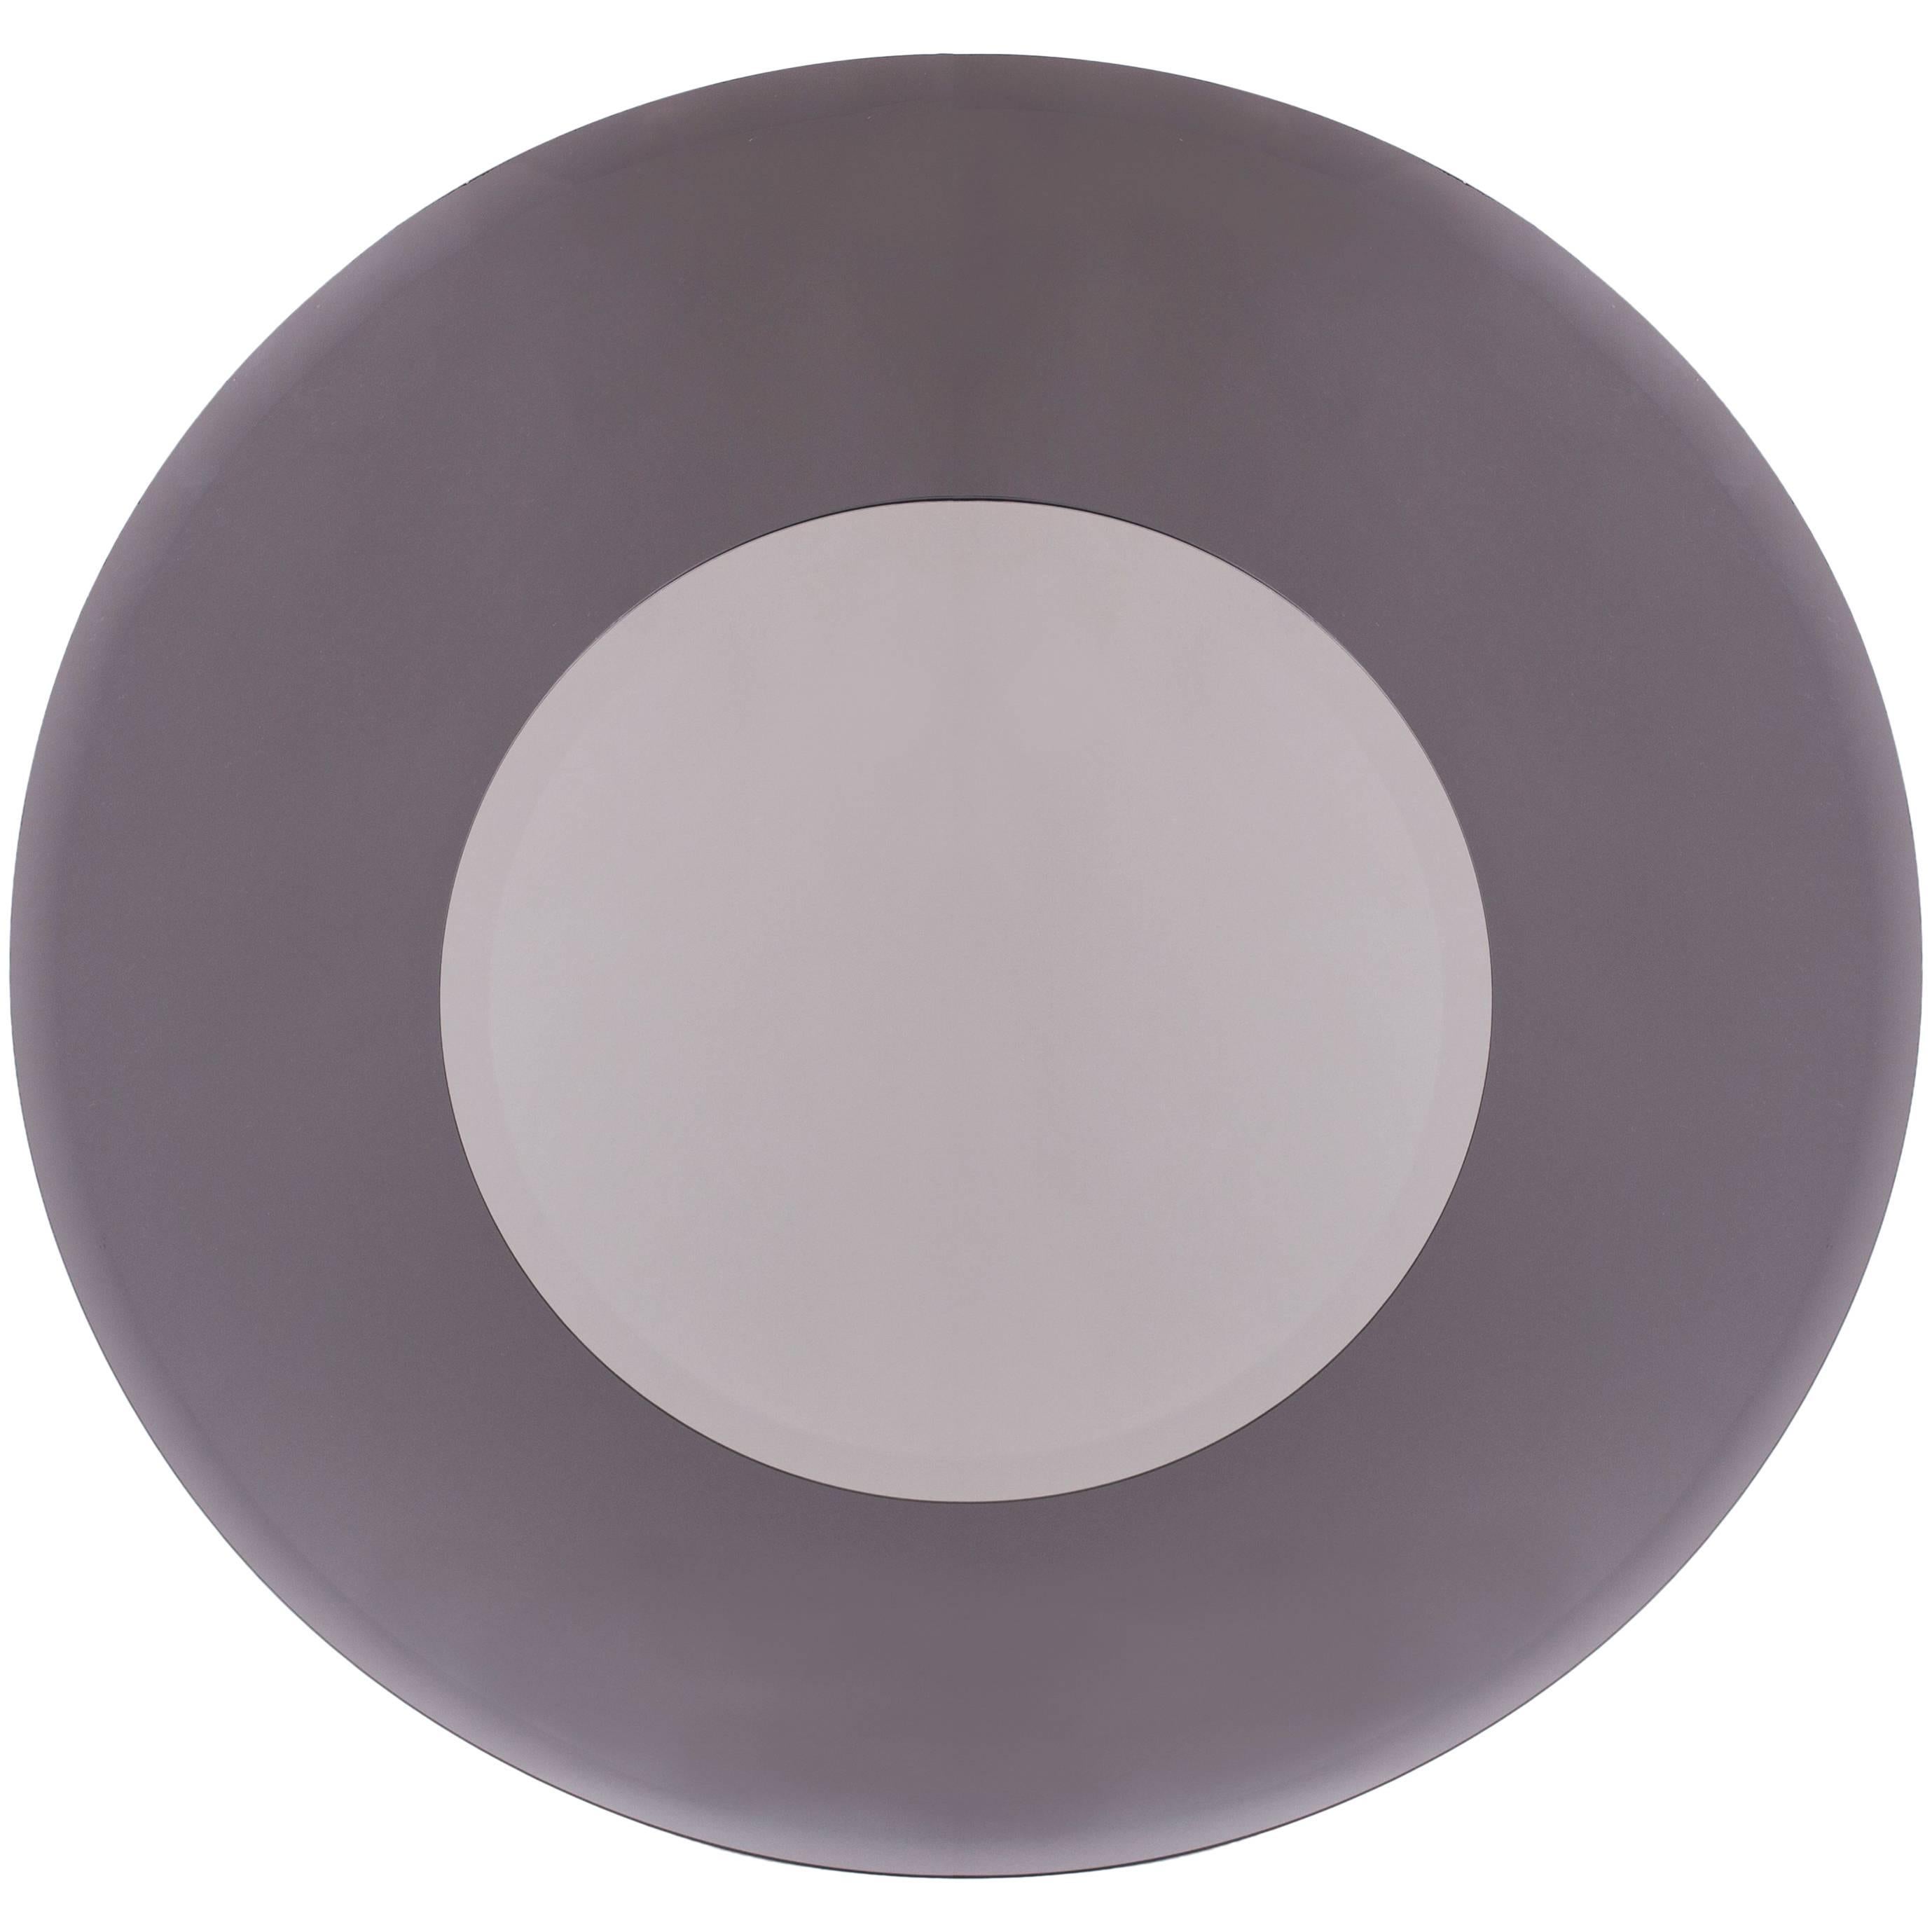 Circular Beveled Sfumato-Grey Mirror in the Manner of Fontana Arte, Italy 1970's For Sale